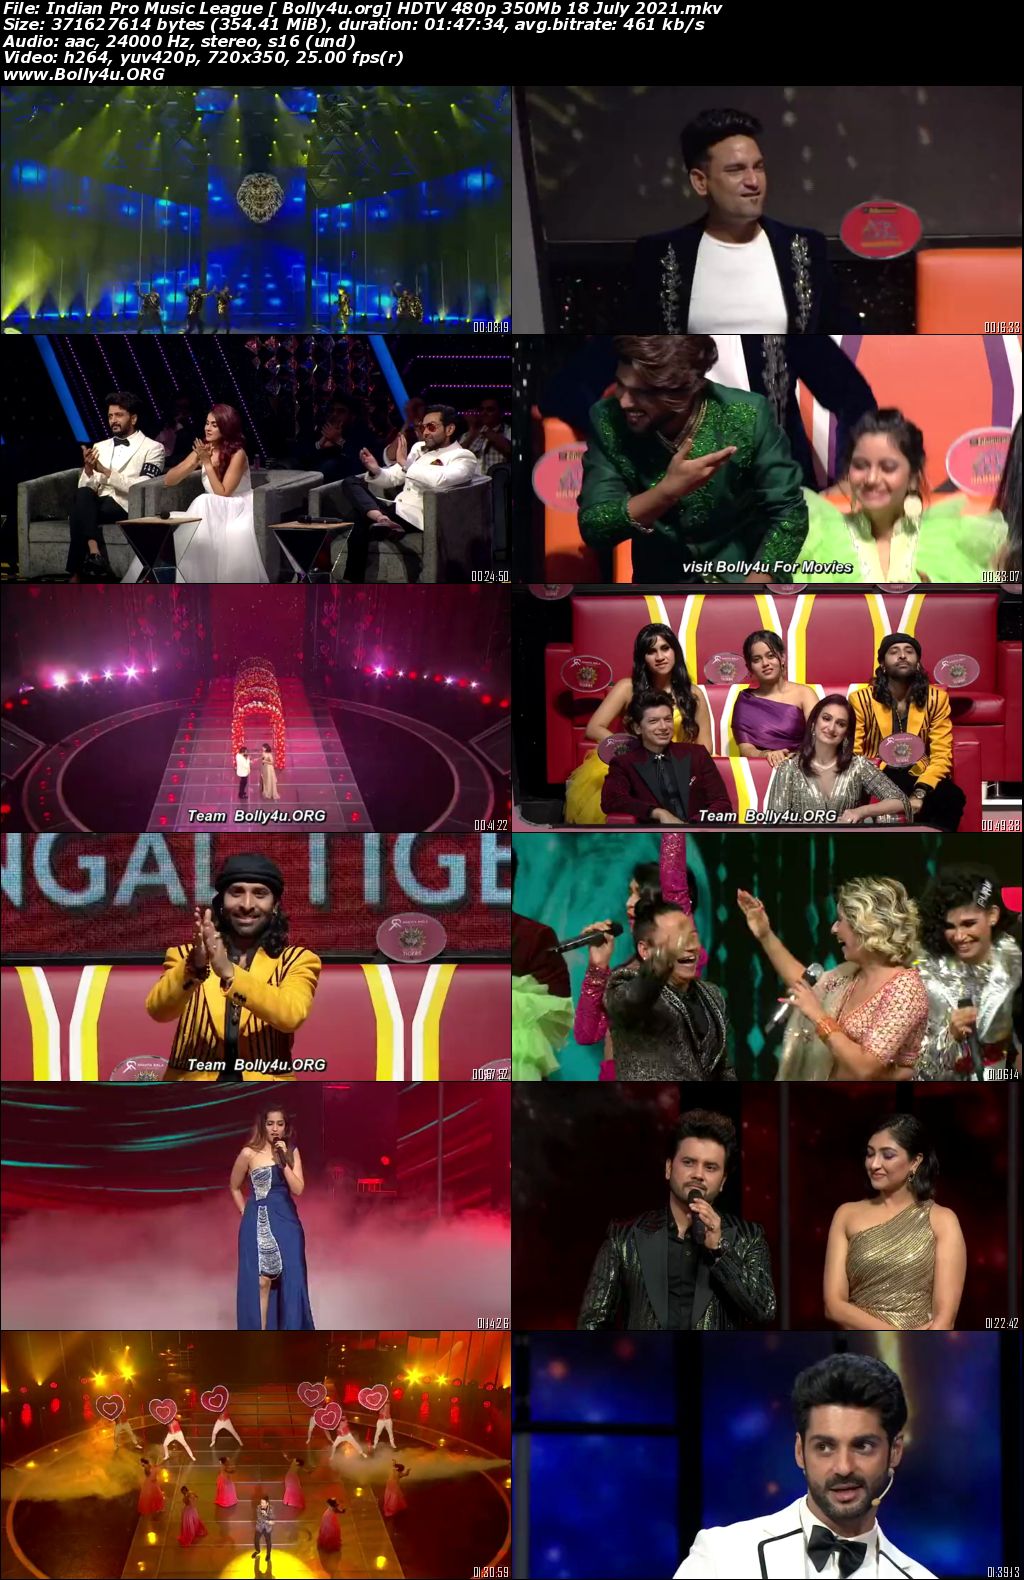 Indian Pro Music League HDTV 480p 350Mb 18 July 2021 Download